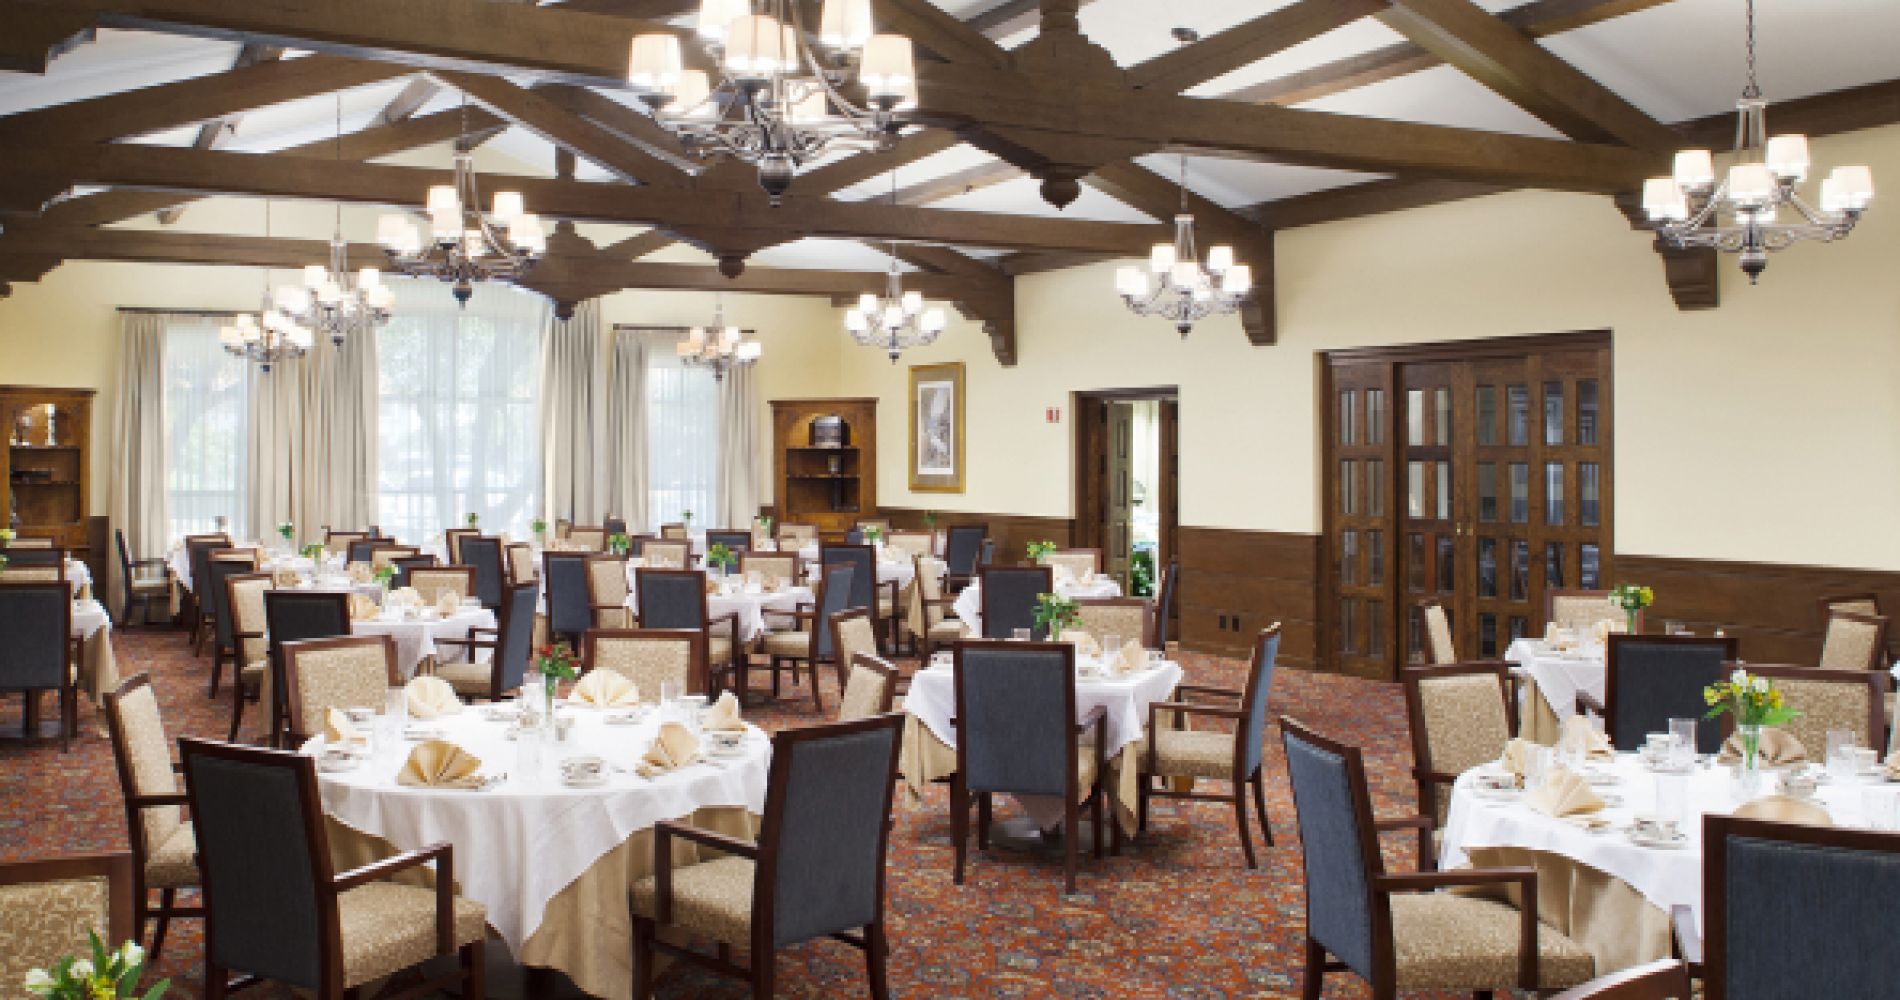 Tables set under the exposed wood beams and chandeliers of the Inn Dining Room at Ponte Vedra Inn & Club.